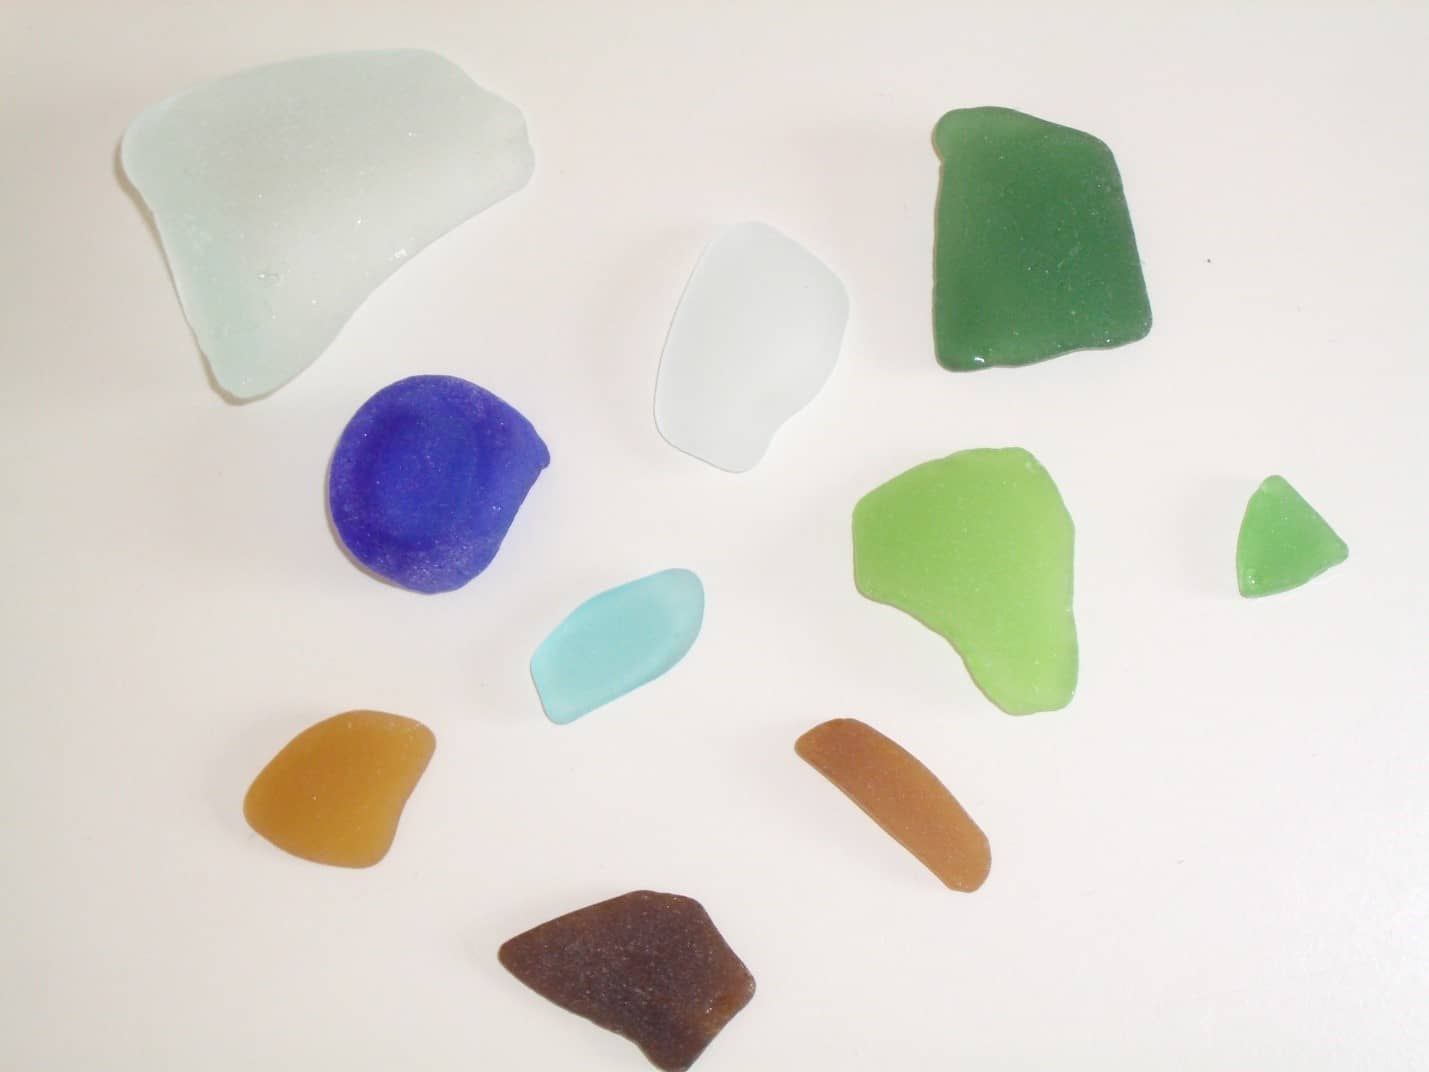 Various colors of sea glass, including green, blue, clear, aqua, brown and amber.